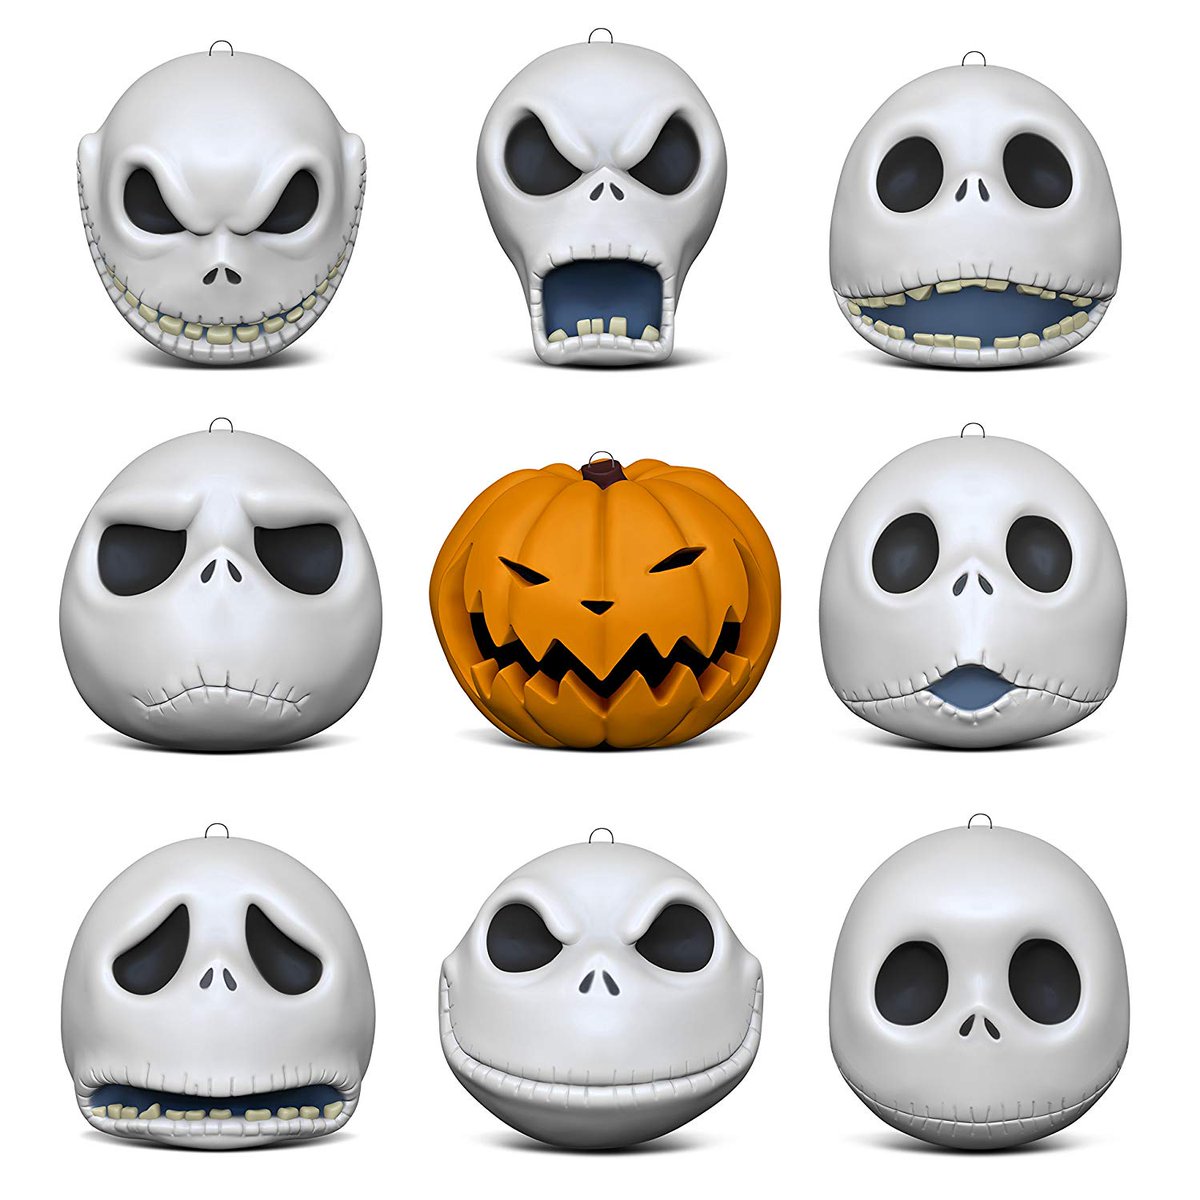 Super Punch: The Many Faces of Jack Skellington 25th Anniversary ornament set1200 x 1200